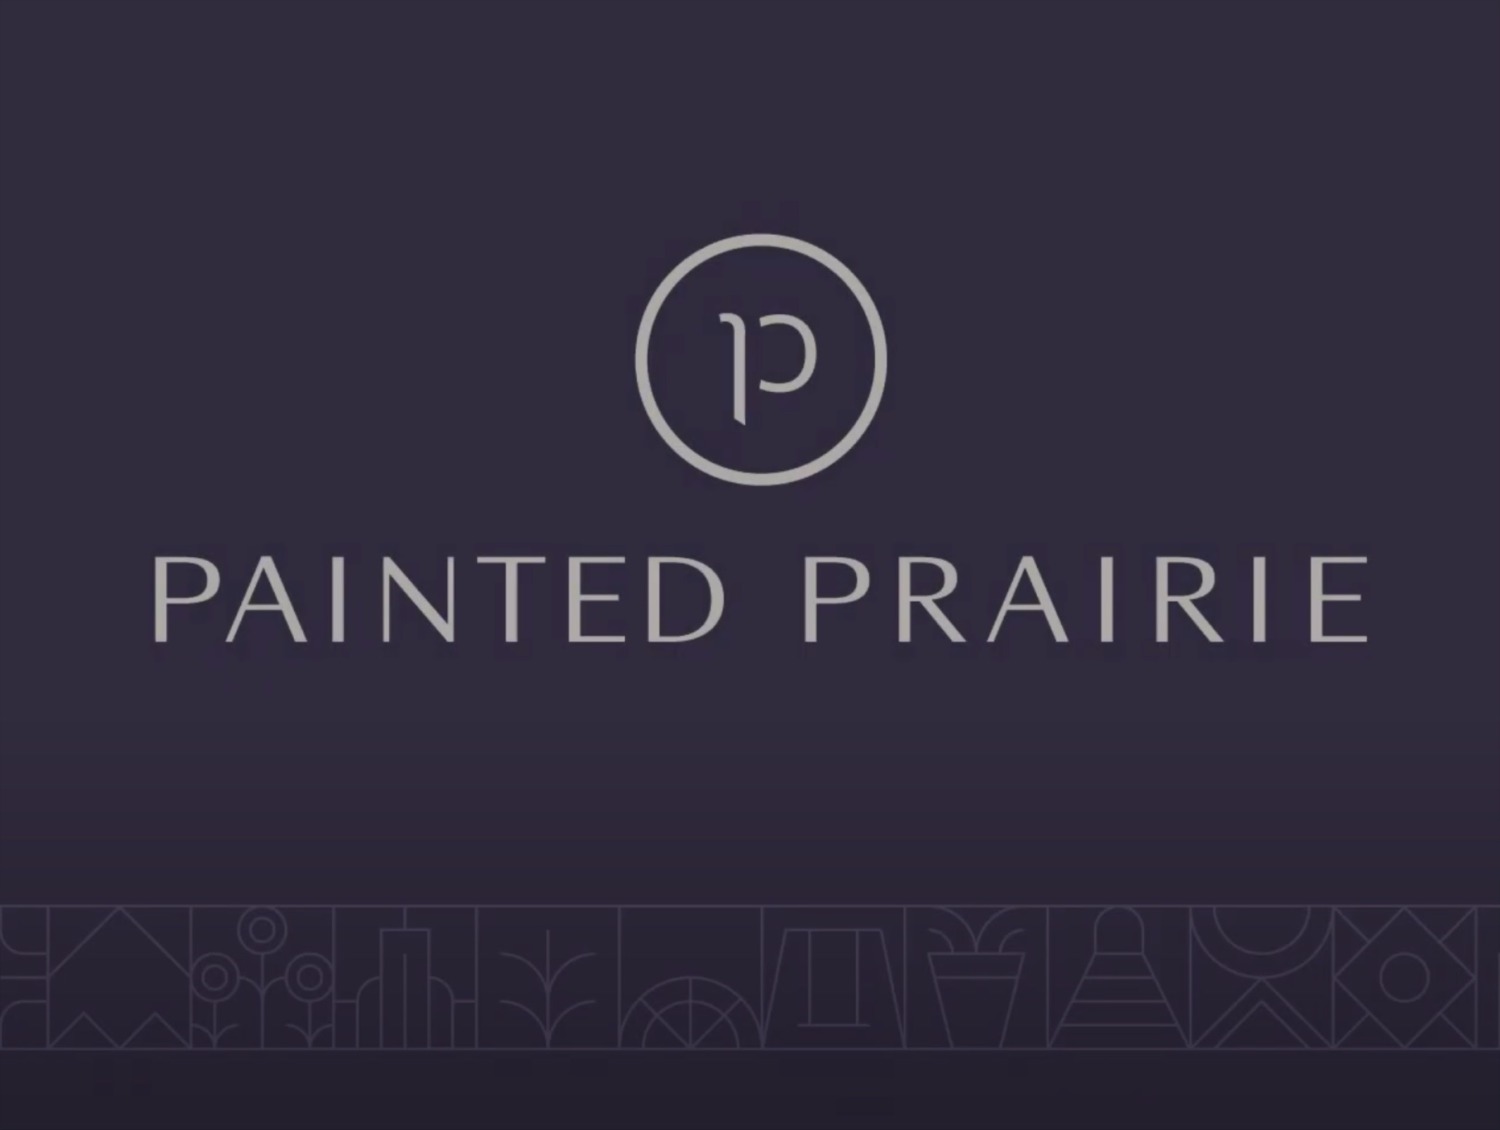 Painted Prairie Interview with Realtors Diana and Michael Kearns